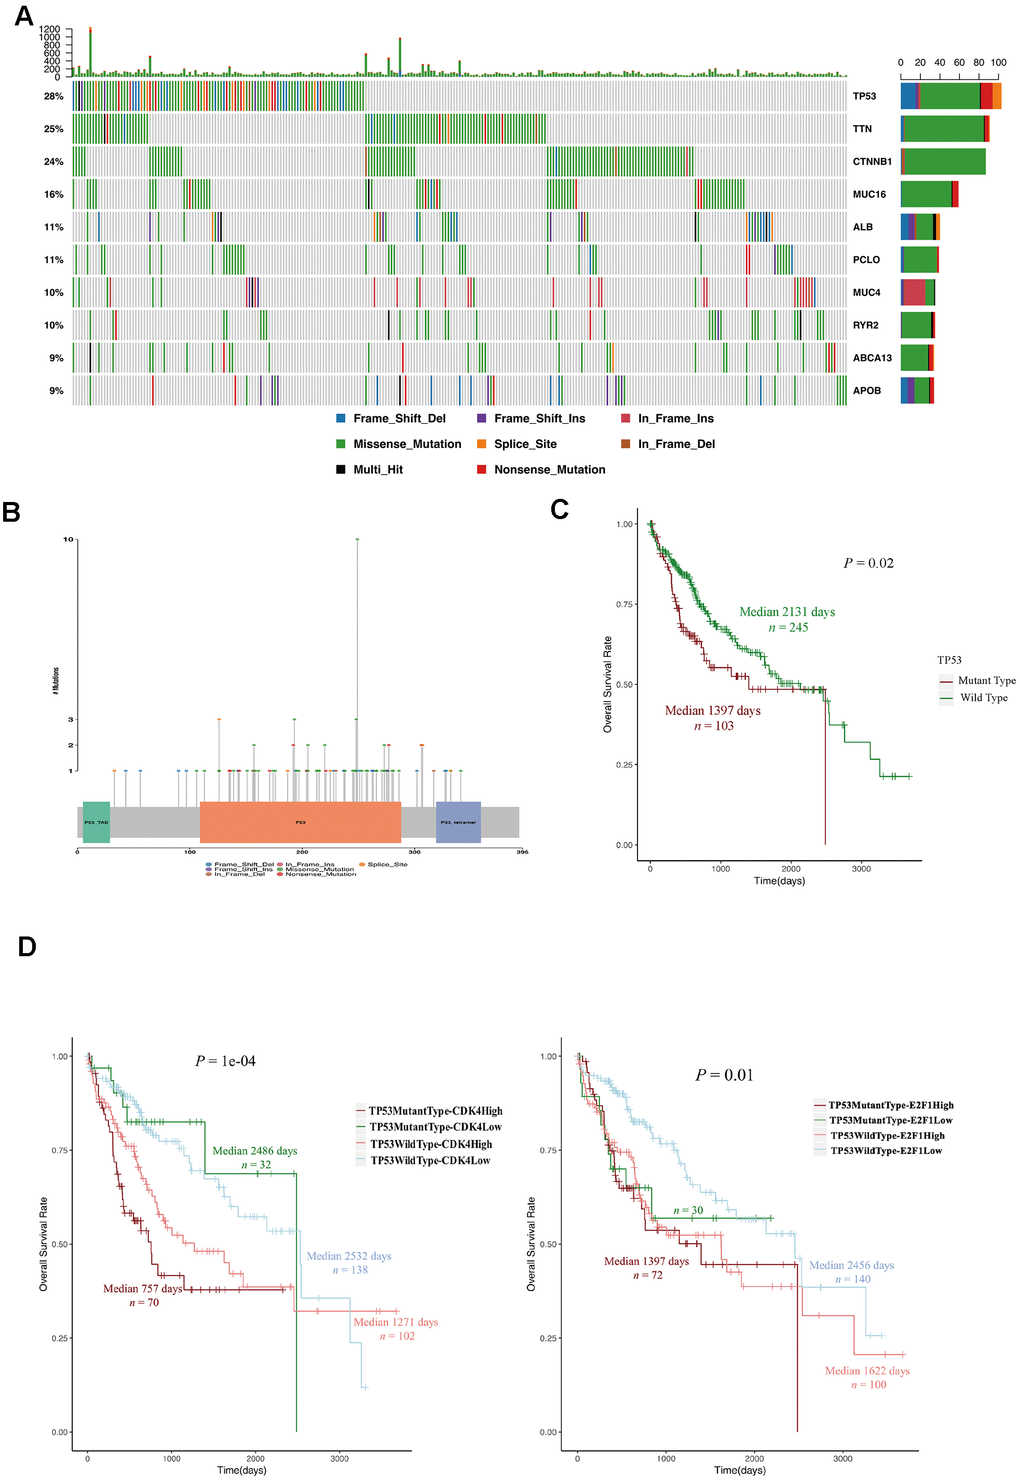 TP53 mutations were associated with a poor prognosis in HCC patients. (A) OncoPlot of the top ten mutated genes. The upper bar plot indicates the number of genetic mutations per patient, while the right bar plot displays the number of genetic mutations per gene. The mutation types were added as annotations on the bottom. Variants annotated as Multi